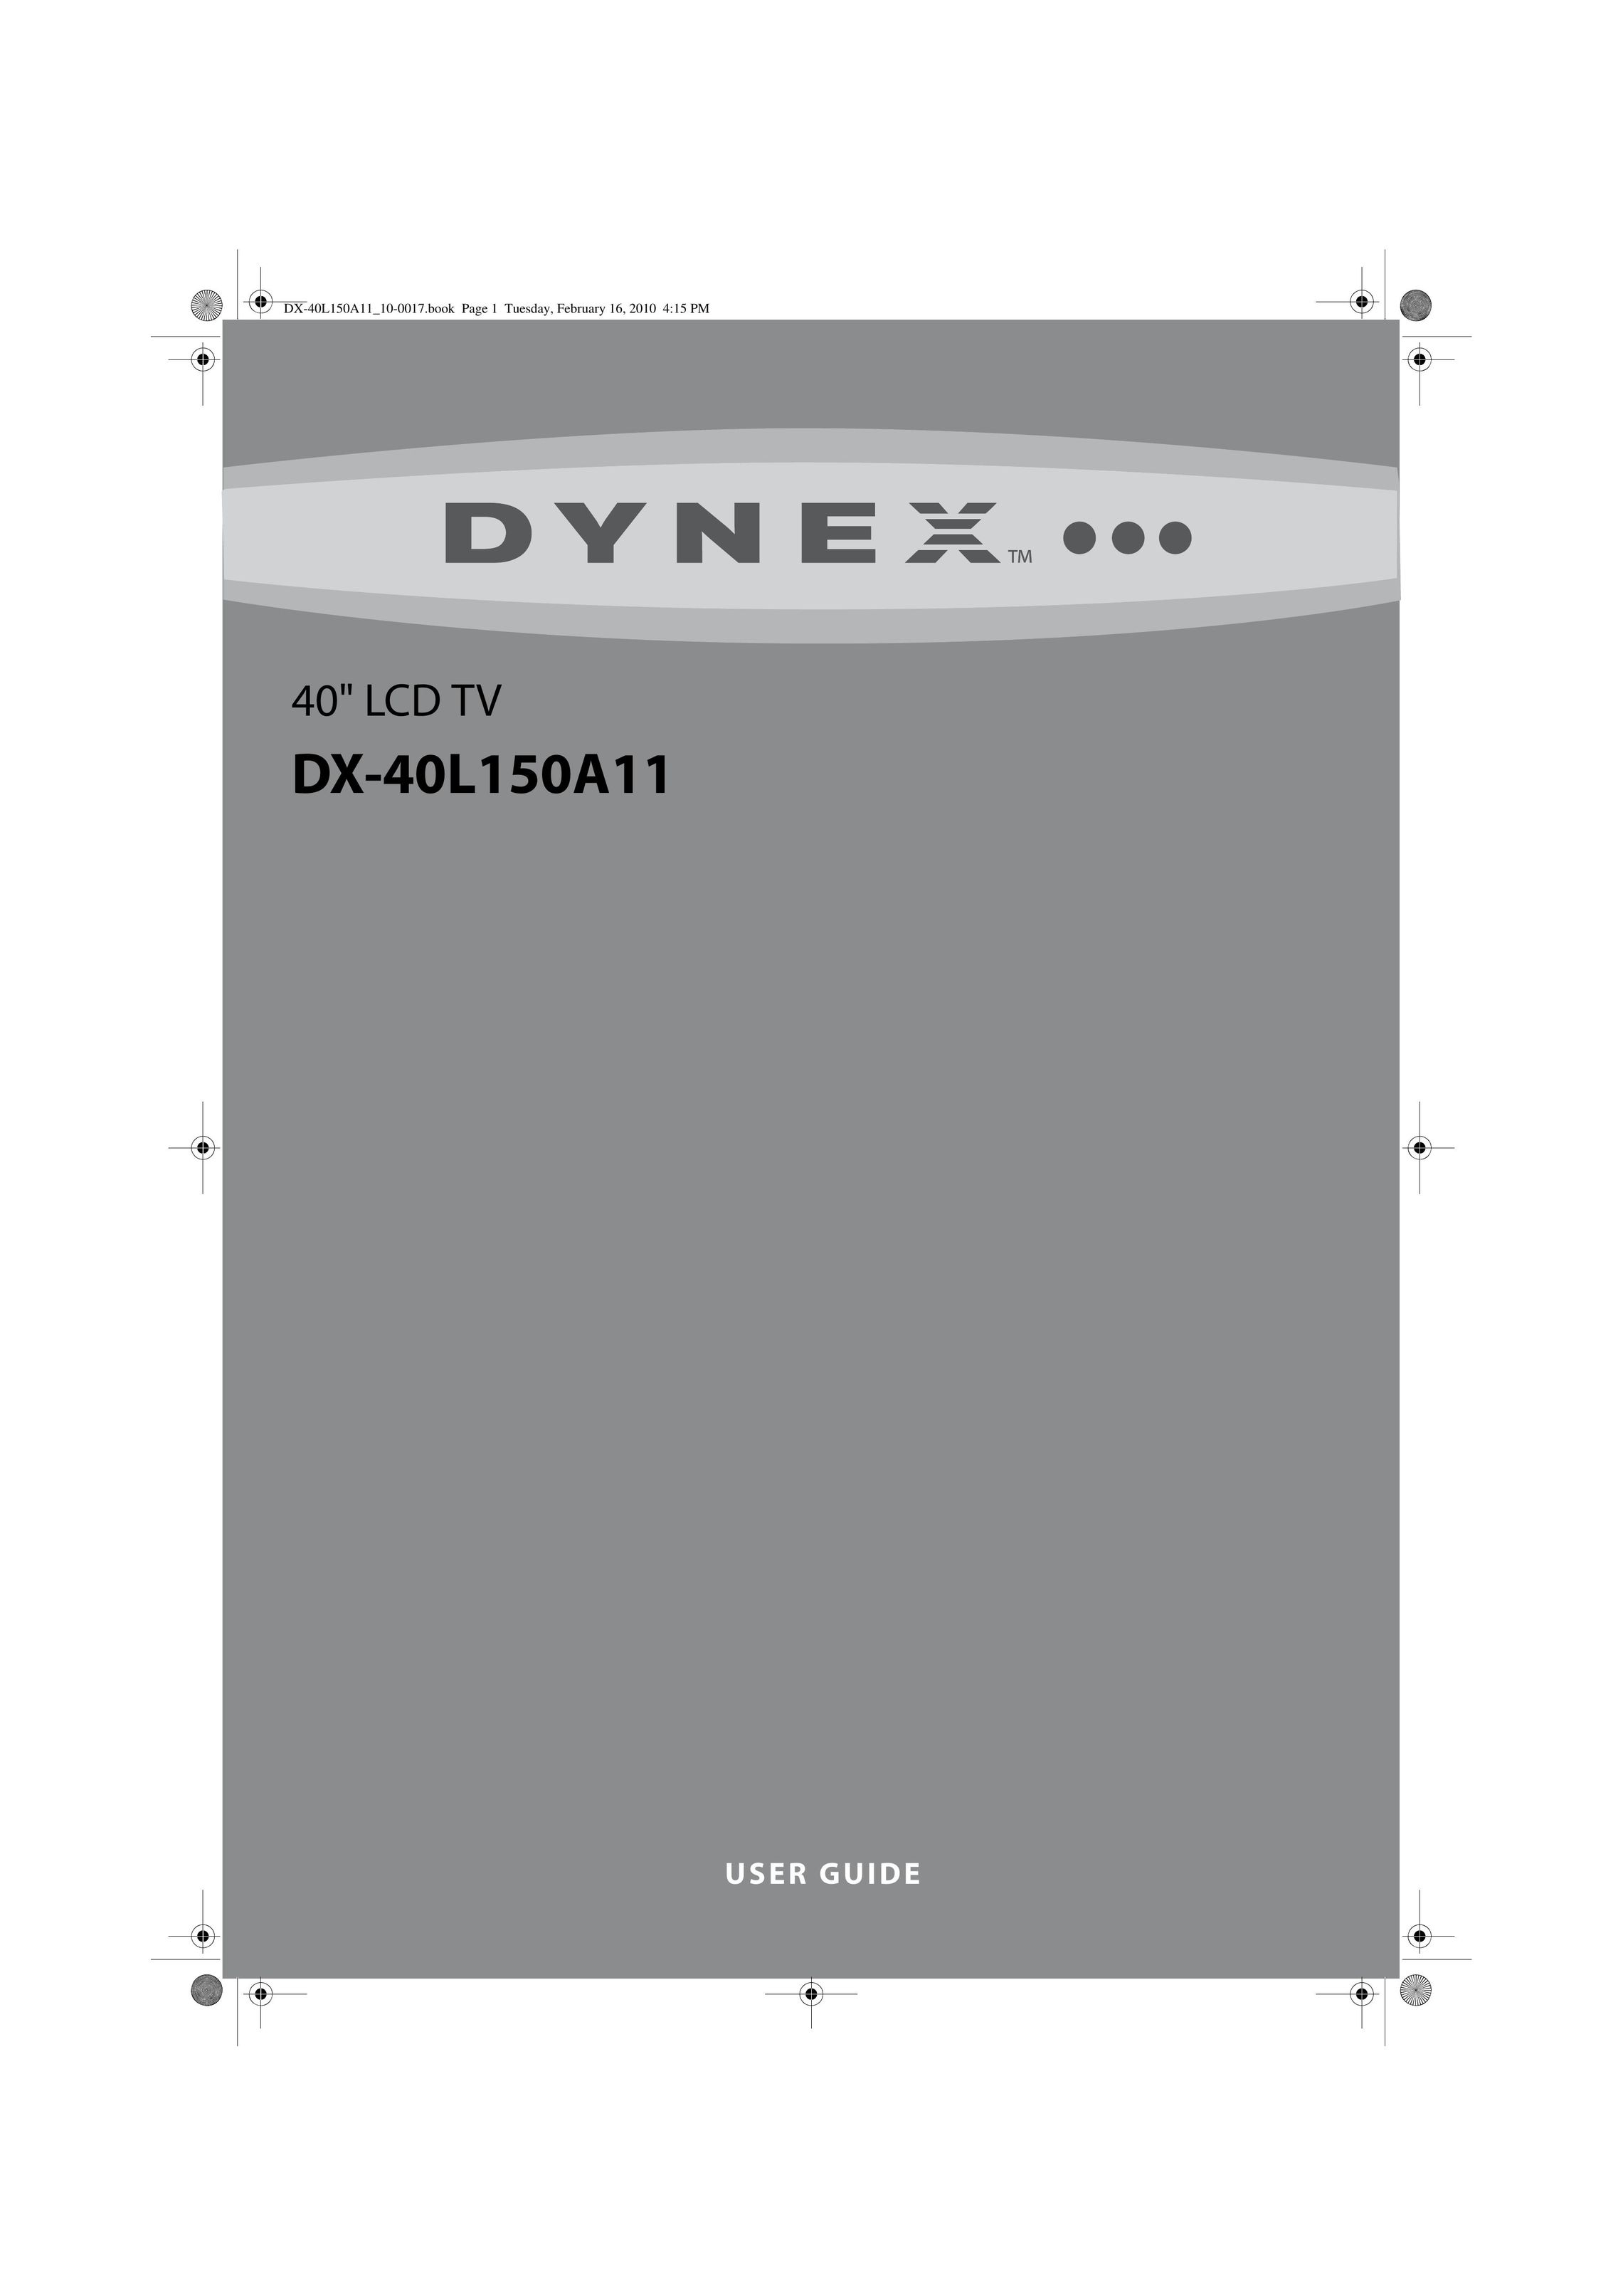 Dynex DX-40L150A11 Flat Panel Television User Manual (Page 1)